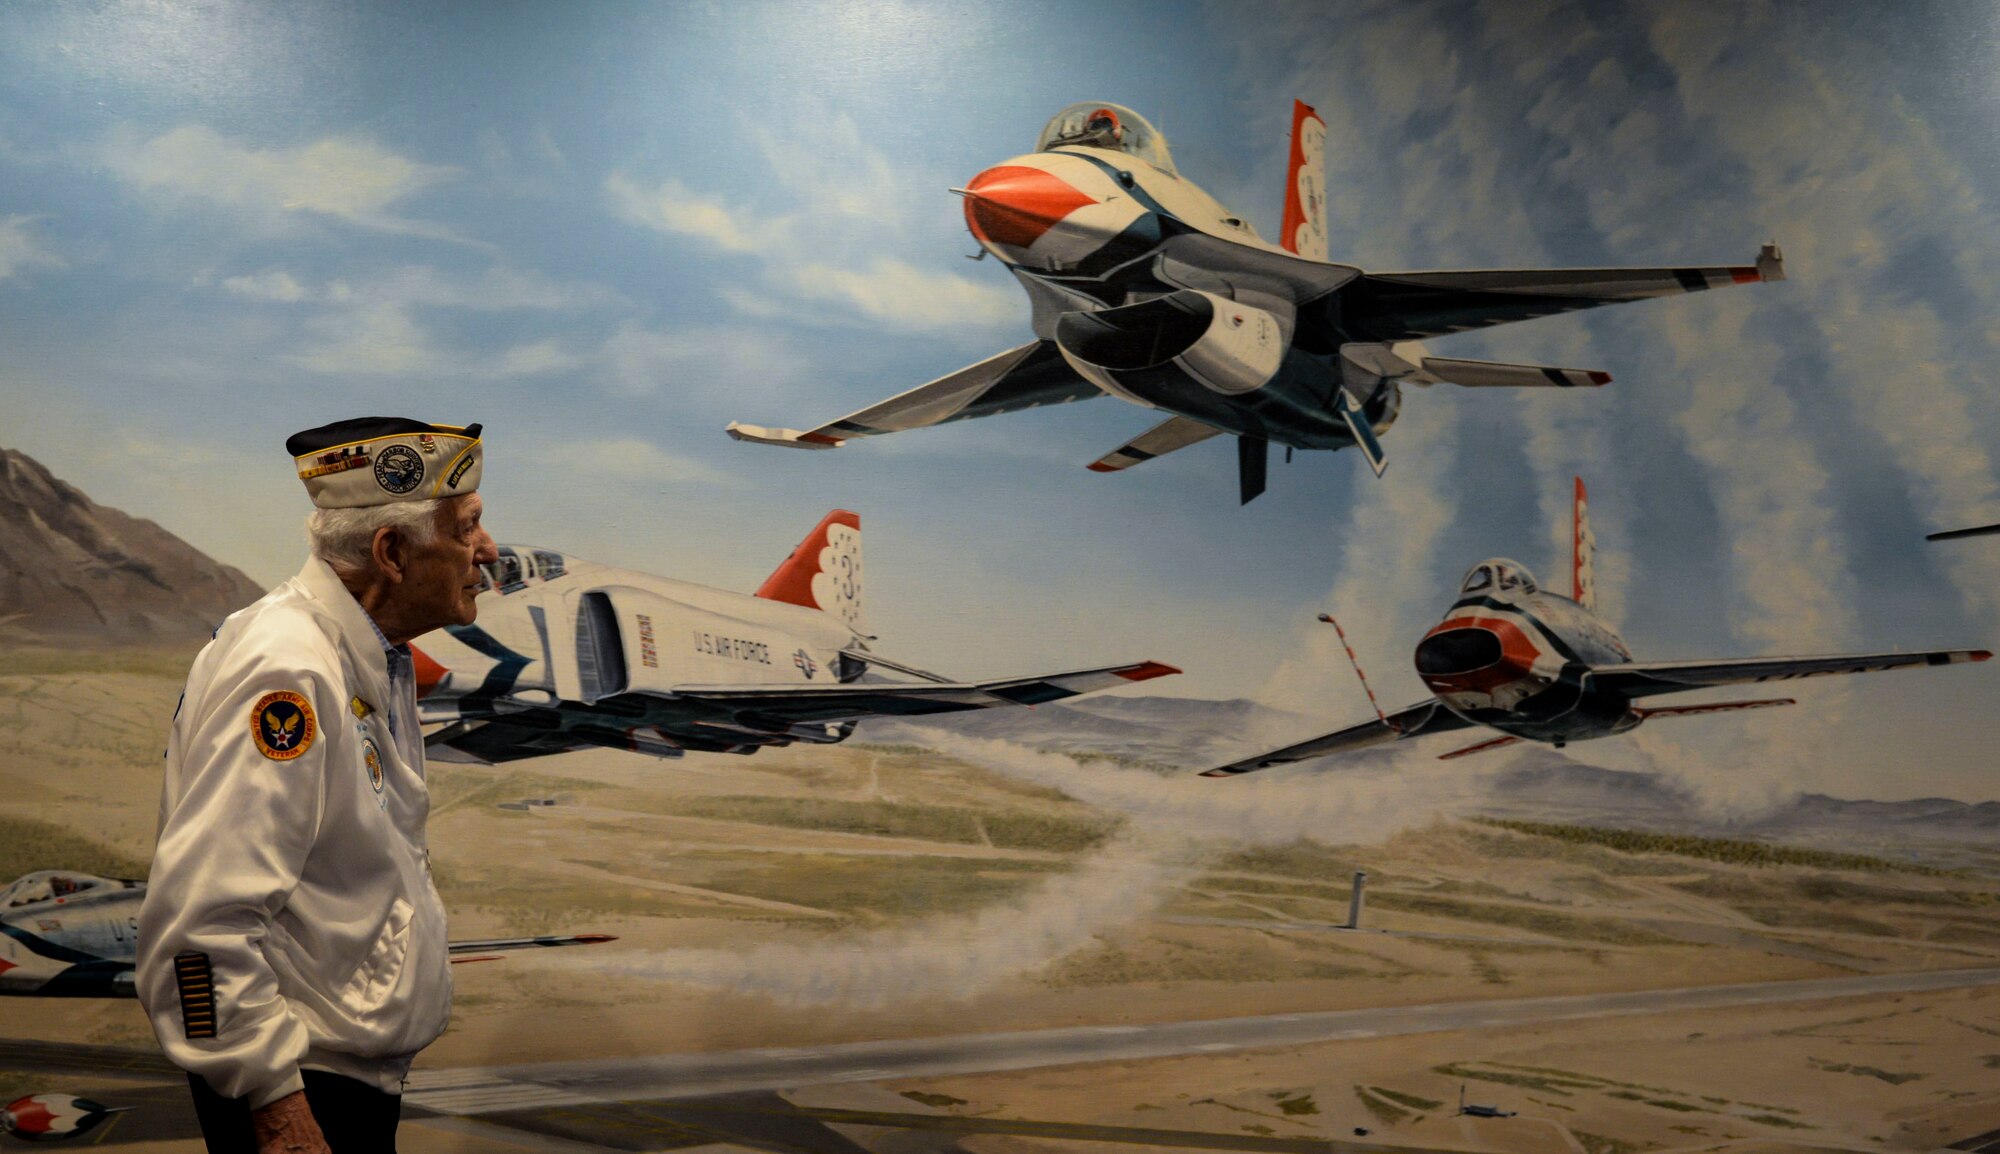 Ed Hall, Pearl Harbor Survivor, observes a mural of the Thunderbirds Dec. 7, 2018 in the Thunderbird Museum at Nellis Air Force Base, Nevada. Hall tested a superstition that stated if he walked from one side of the mural to the other, the jets would appear to fly towards him. (U.S. Air Force photo by Airman 1st Class Bailee A. Darbasie)